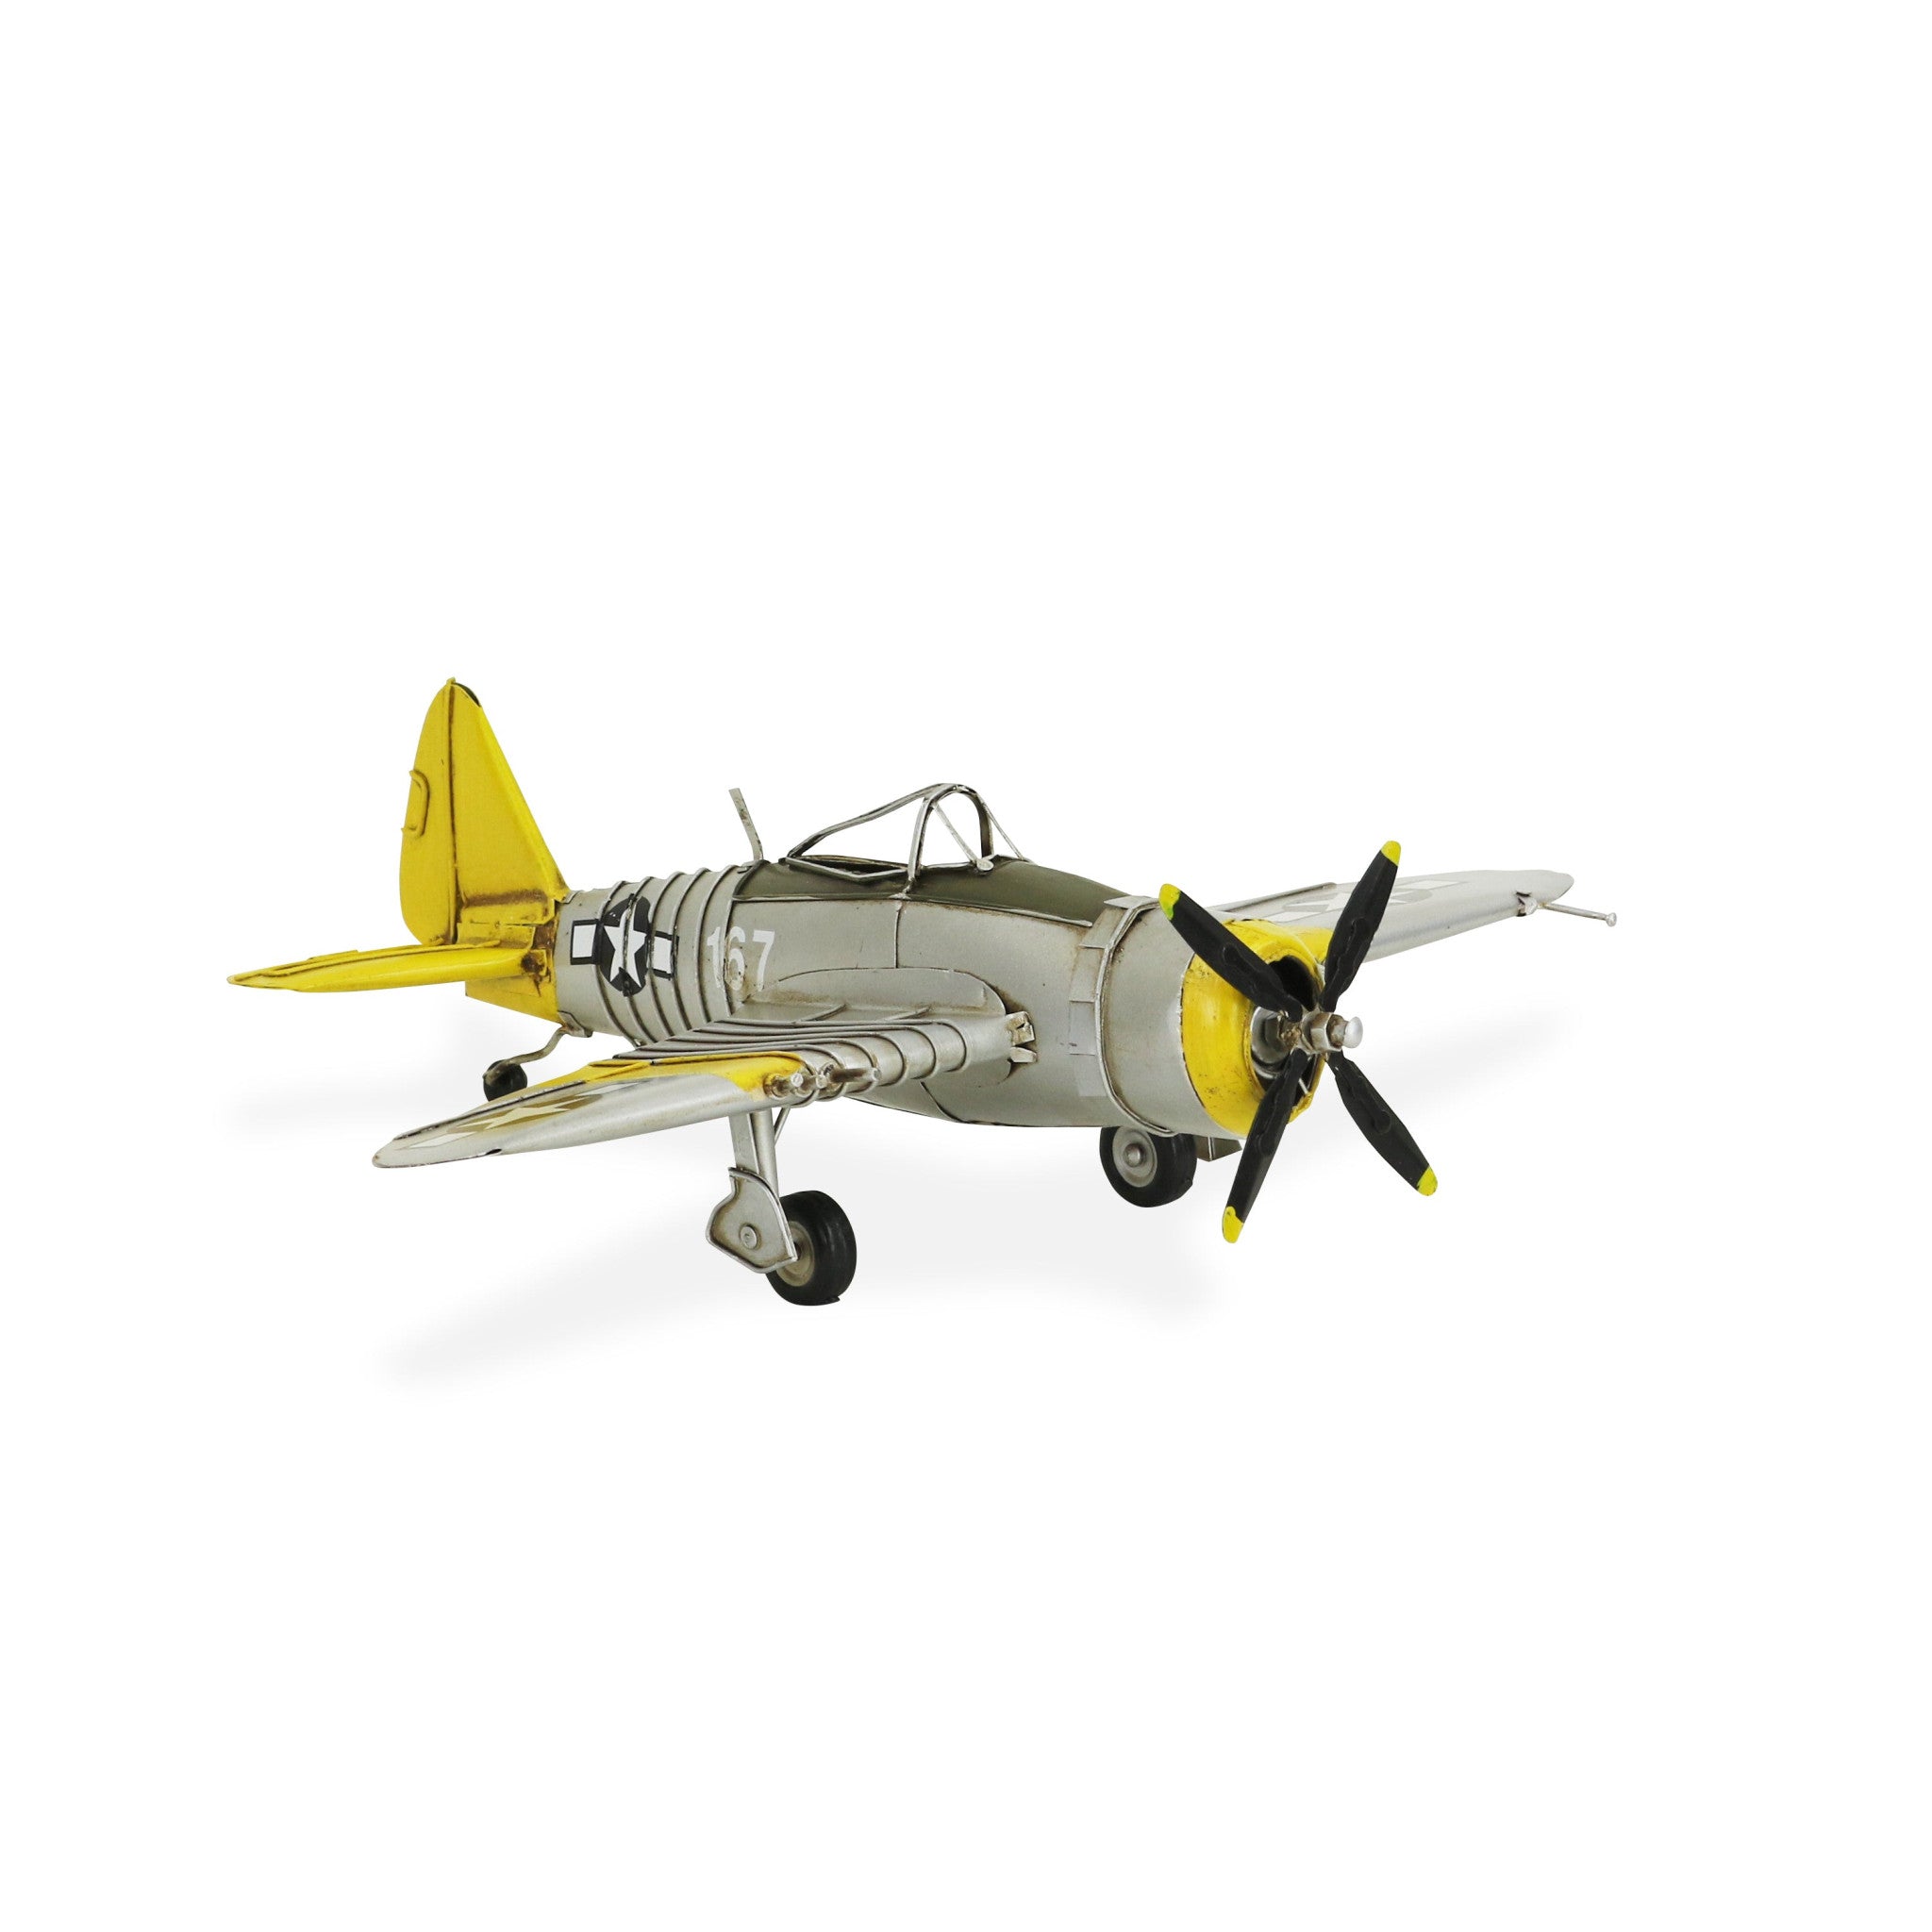 4" Yellow and Gray Metal Hand Painted Model Airplane